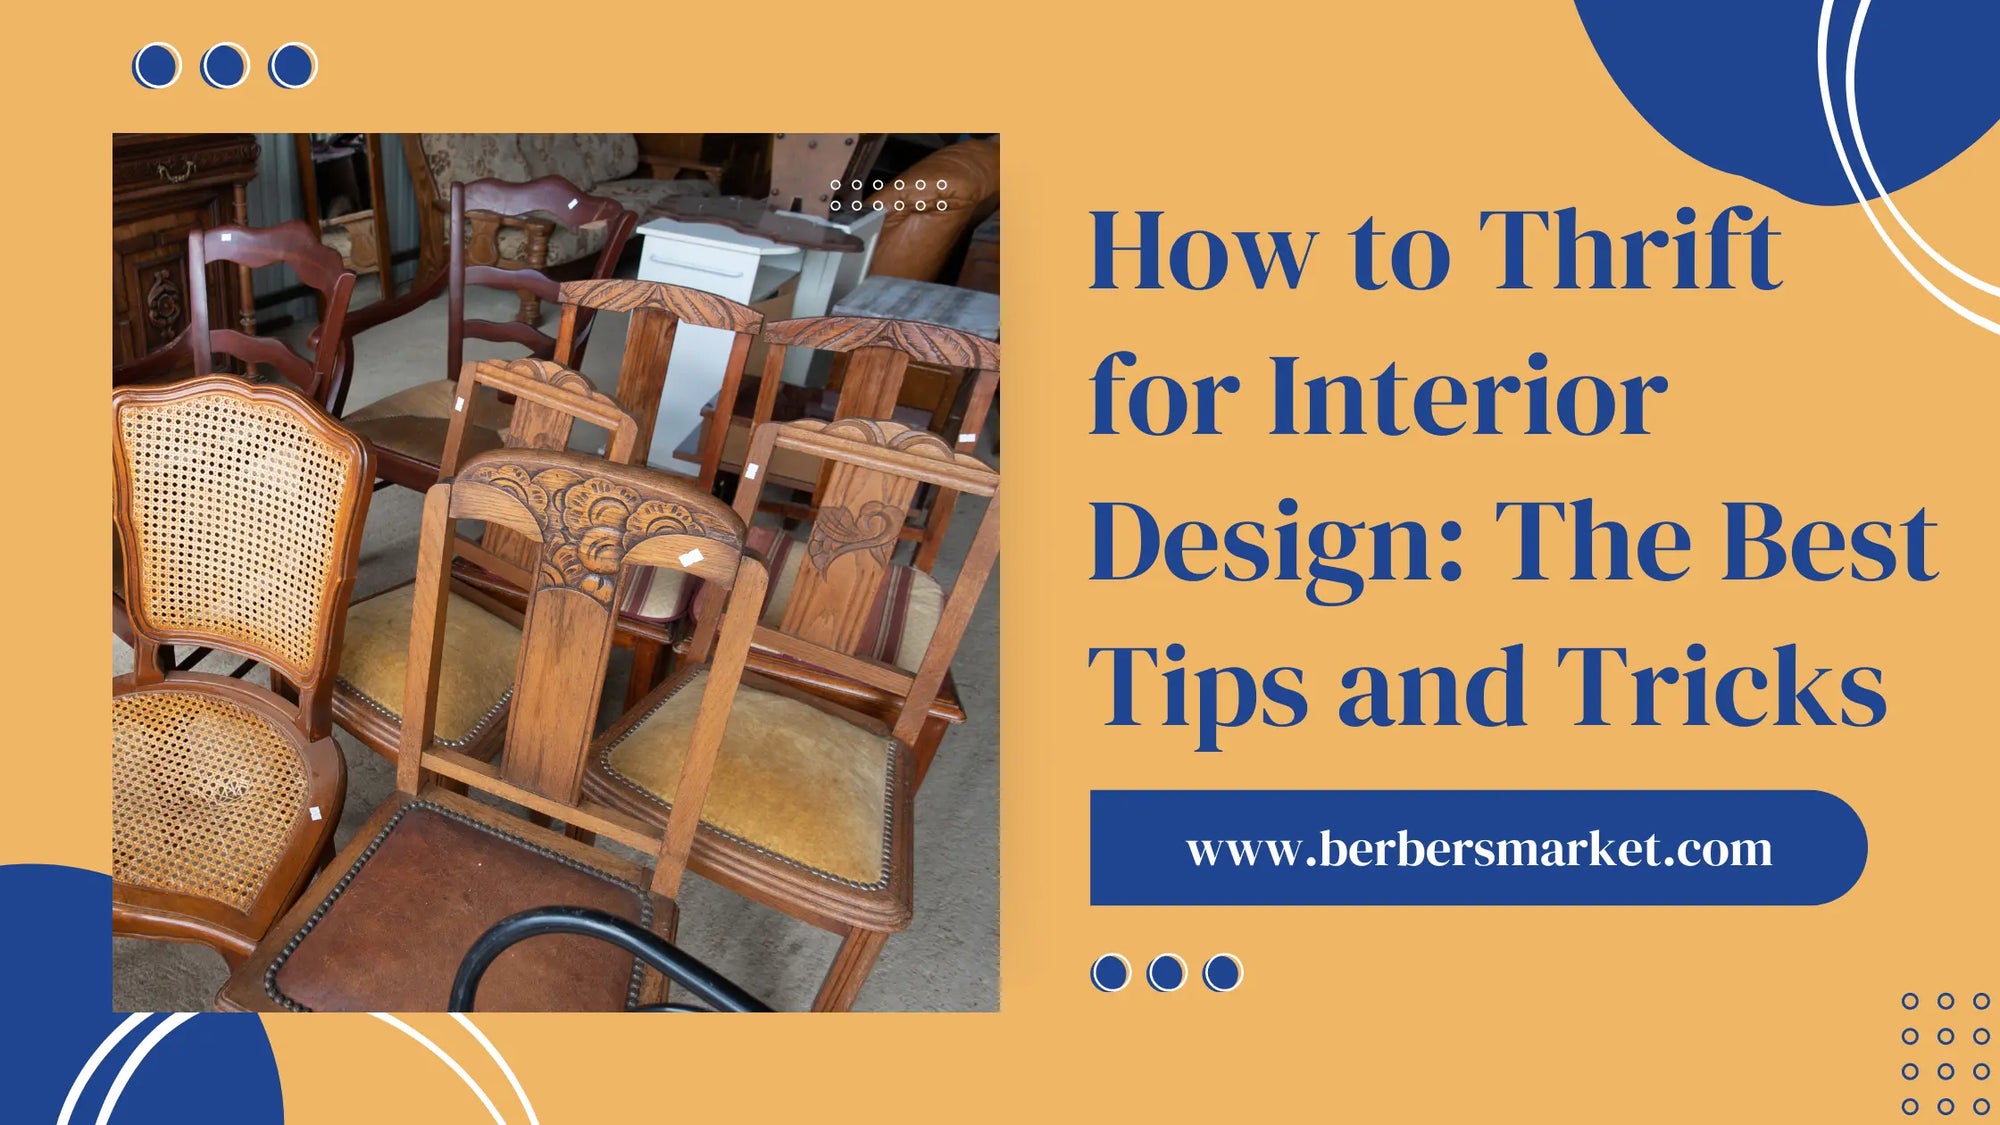 Blog banner talking about: "How to Thrift for Interior Design: The Best Tips and Tricks" with a picture showing a thrifted vintage chairs.